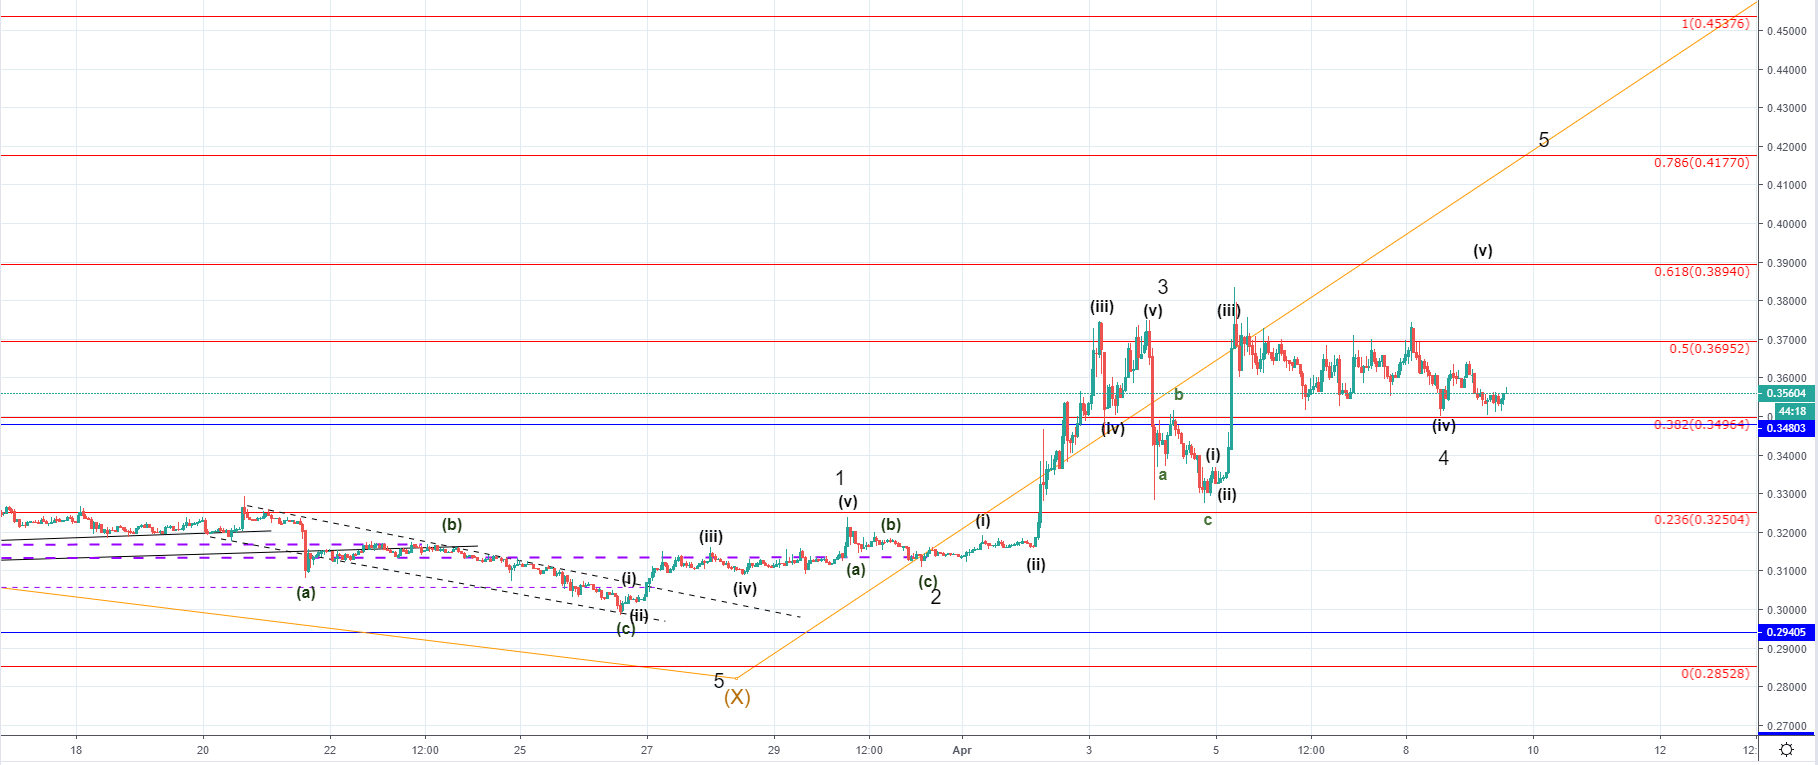 BTC/USD and XRP/USD showing signs of weakness but another increase is likely to happen